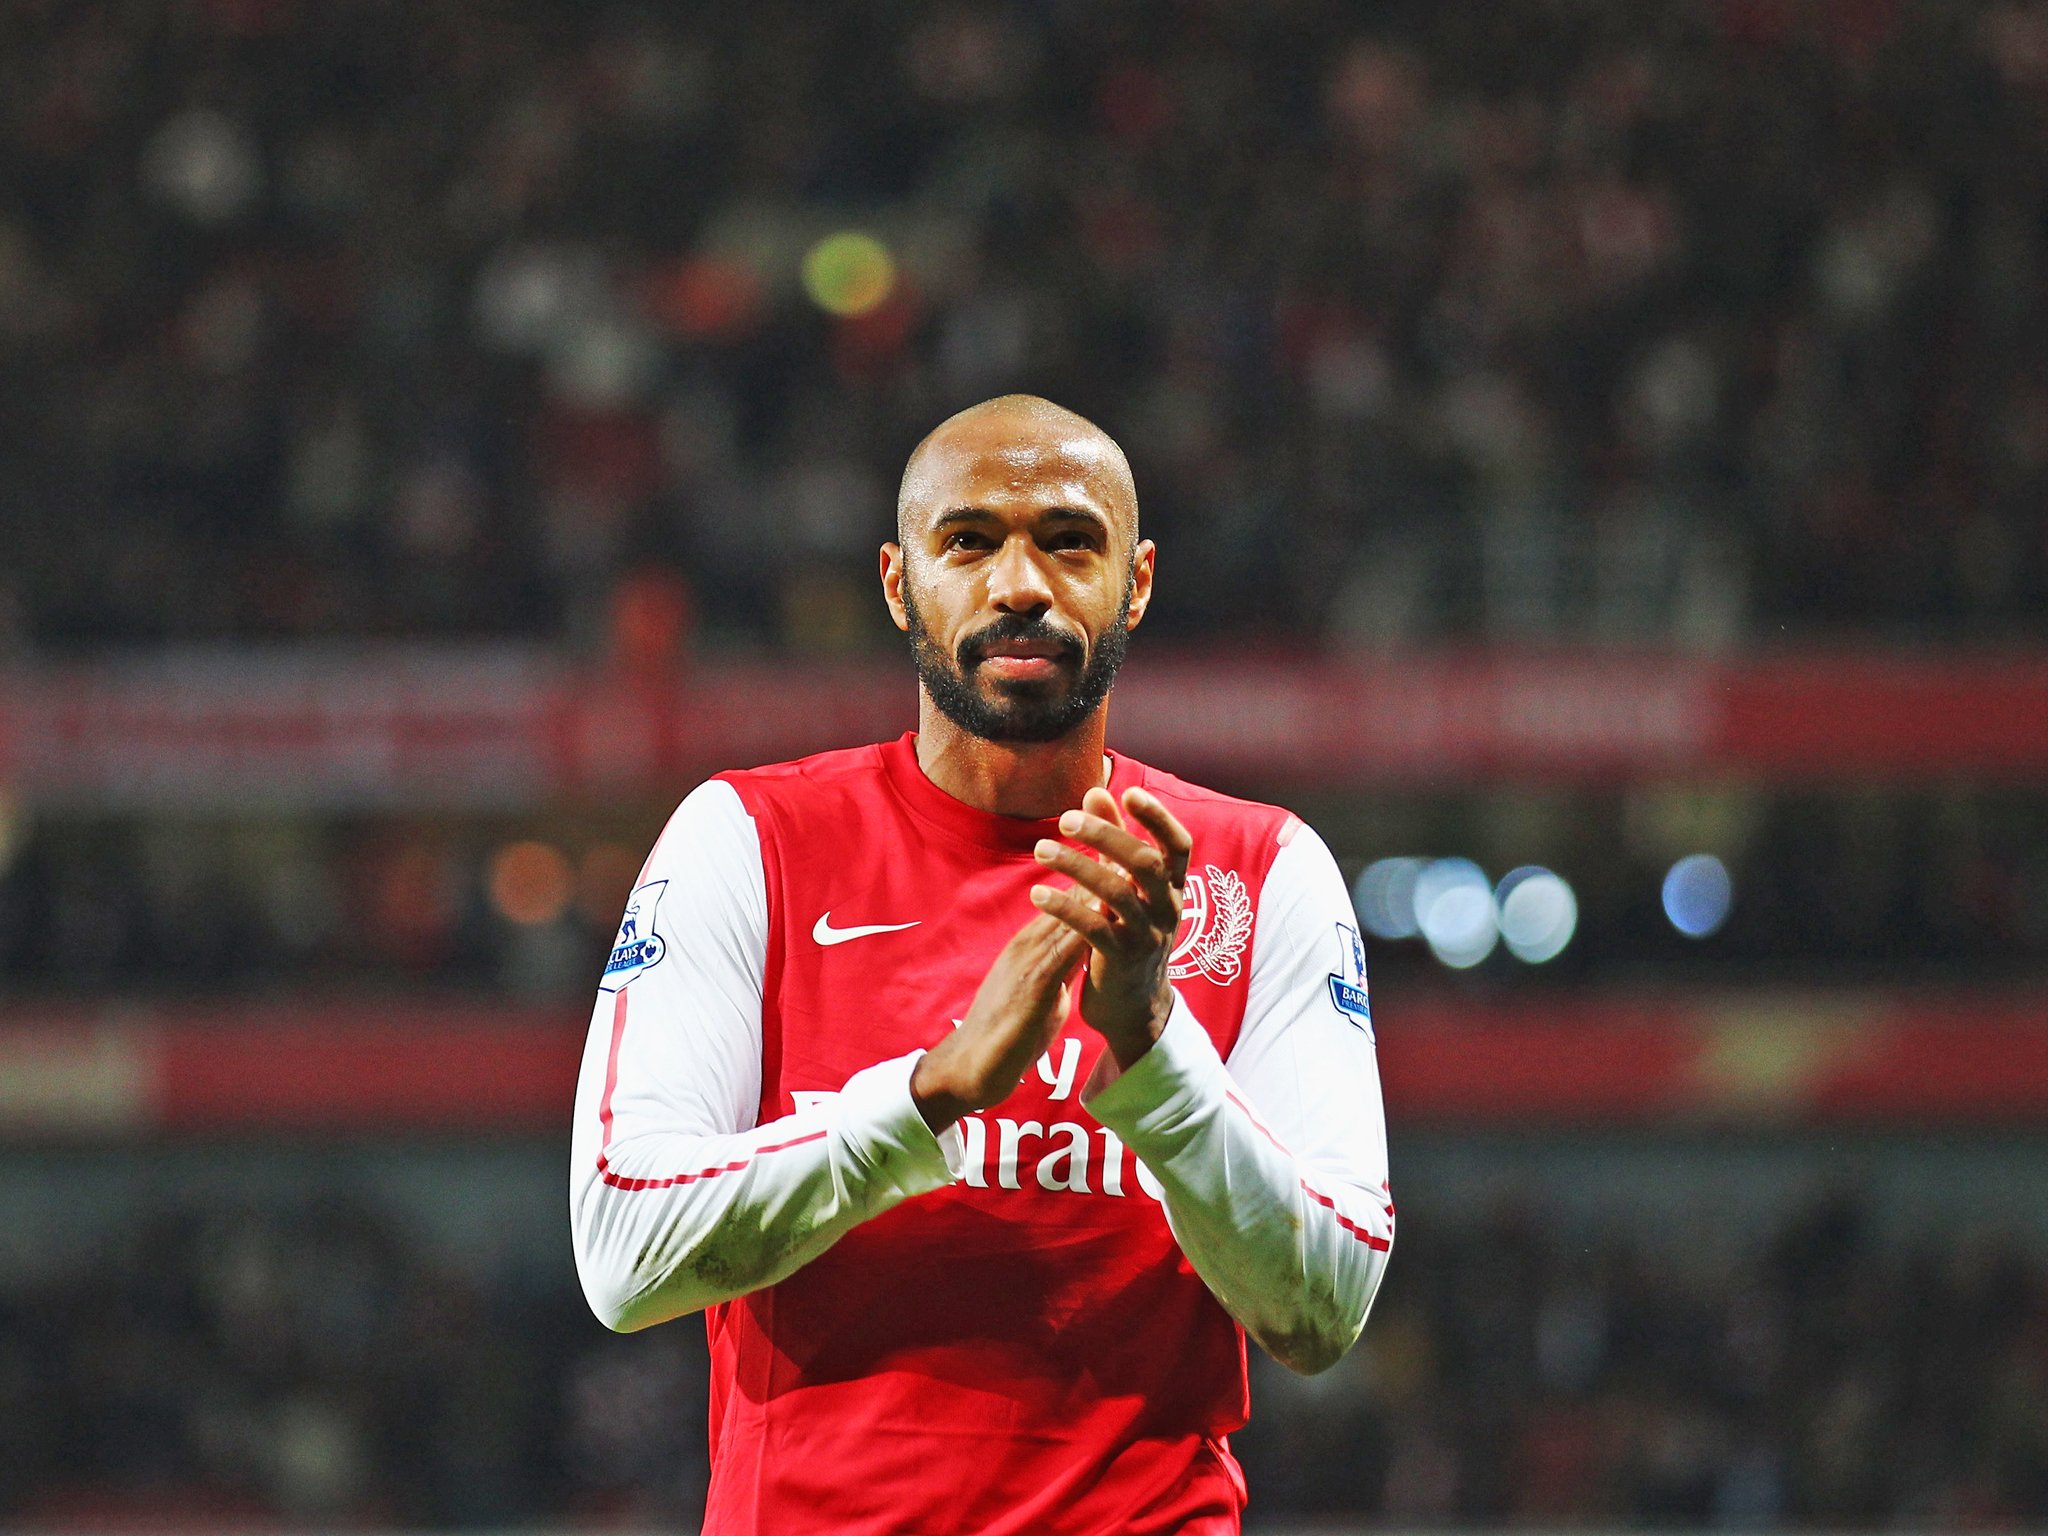 Happy birthday to Arsenal legend and Invincible Thierry Henry, who turns 41 today! afcstuff